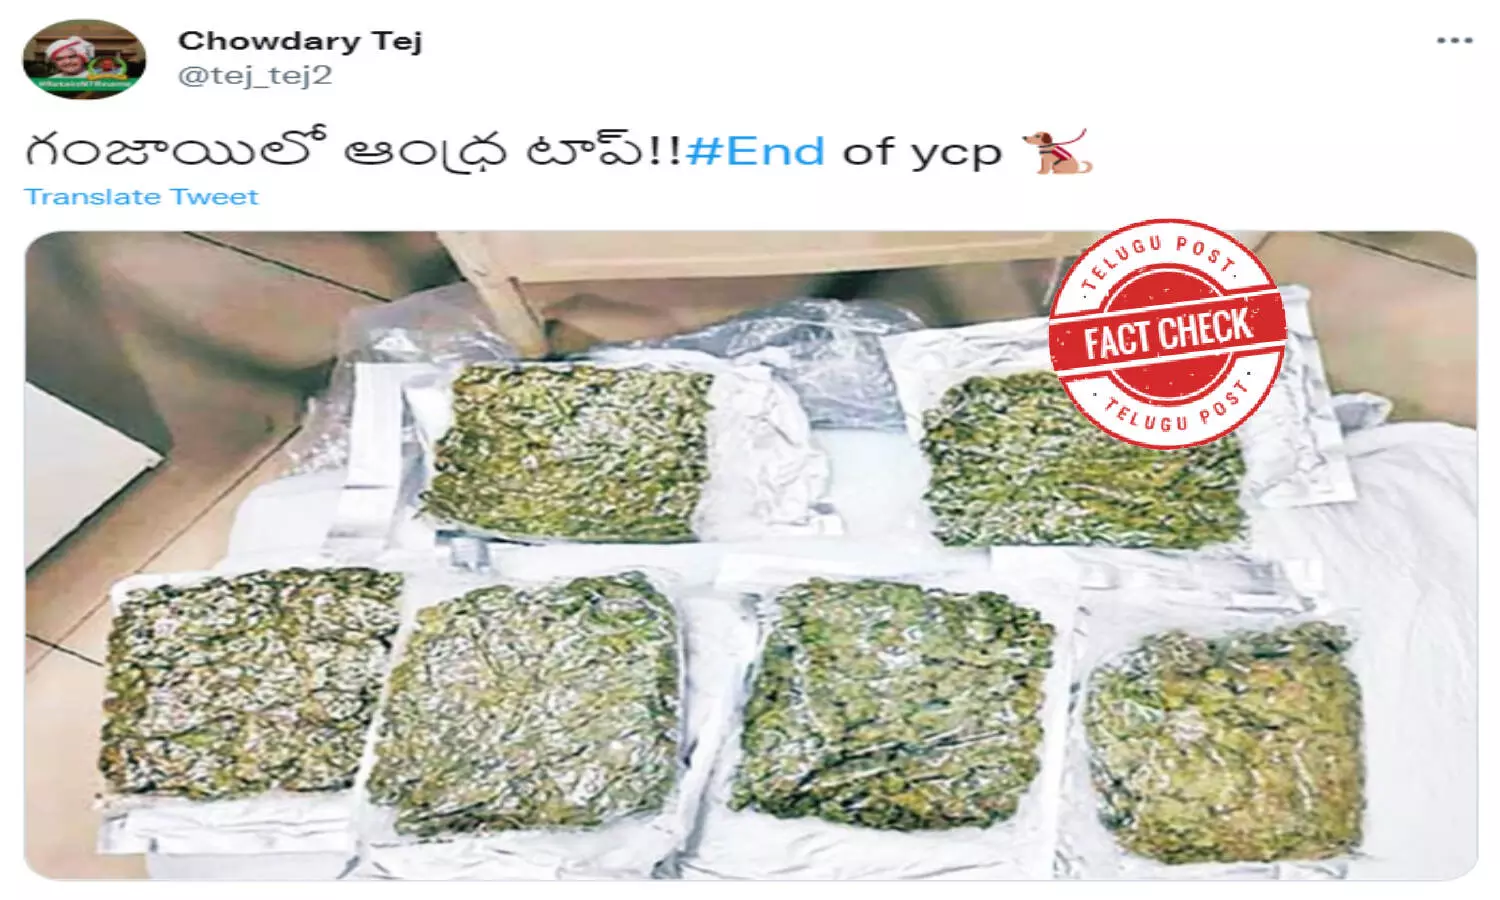 Fact Check: Image of ganja packets with connection to AP are MISLEADING